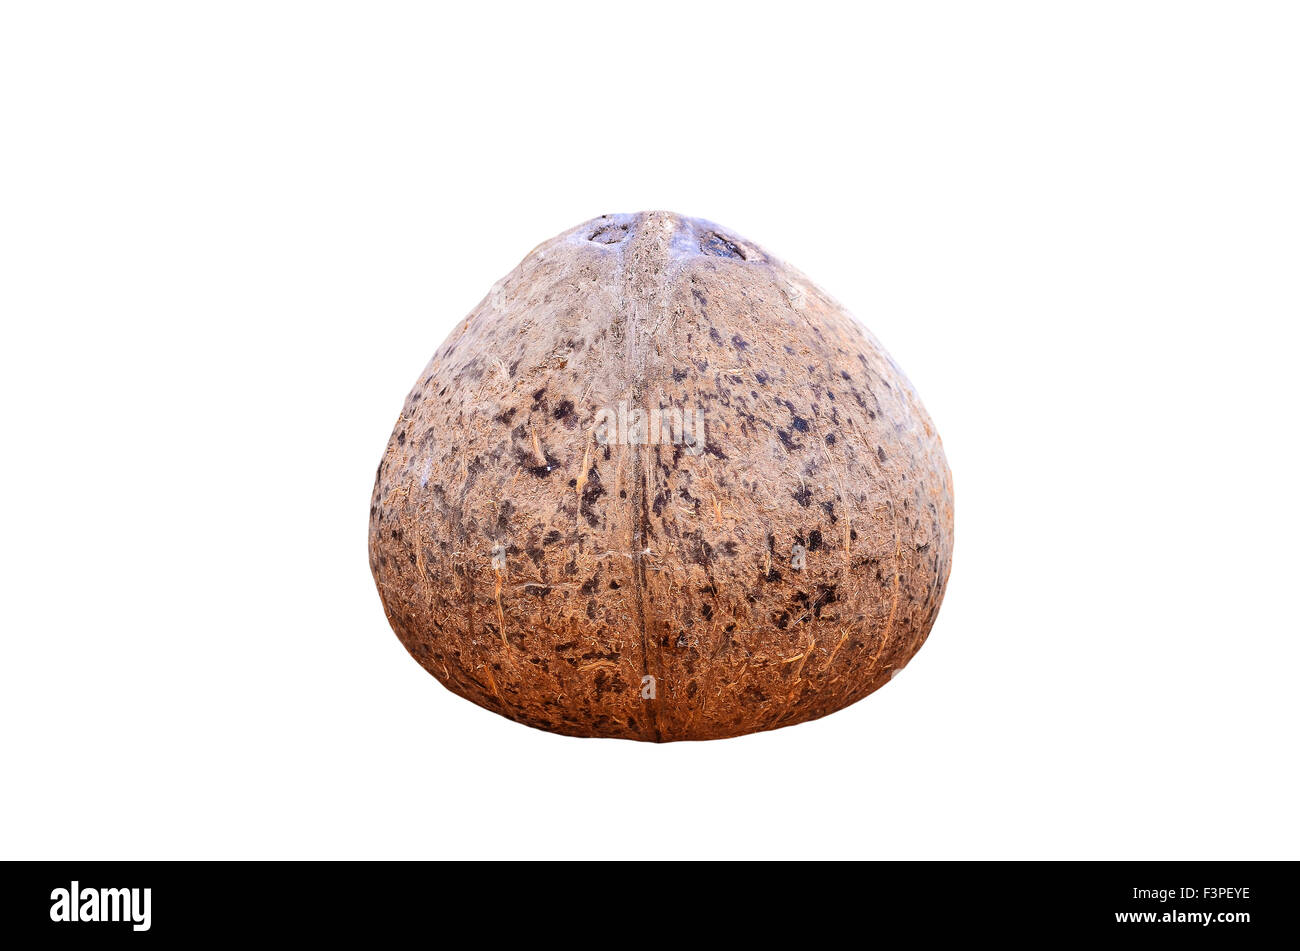 Coconut shell on white background Stock Photo